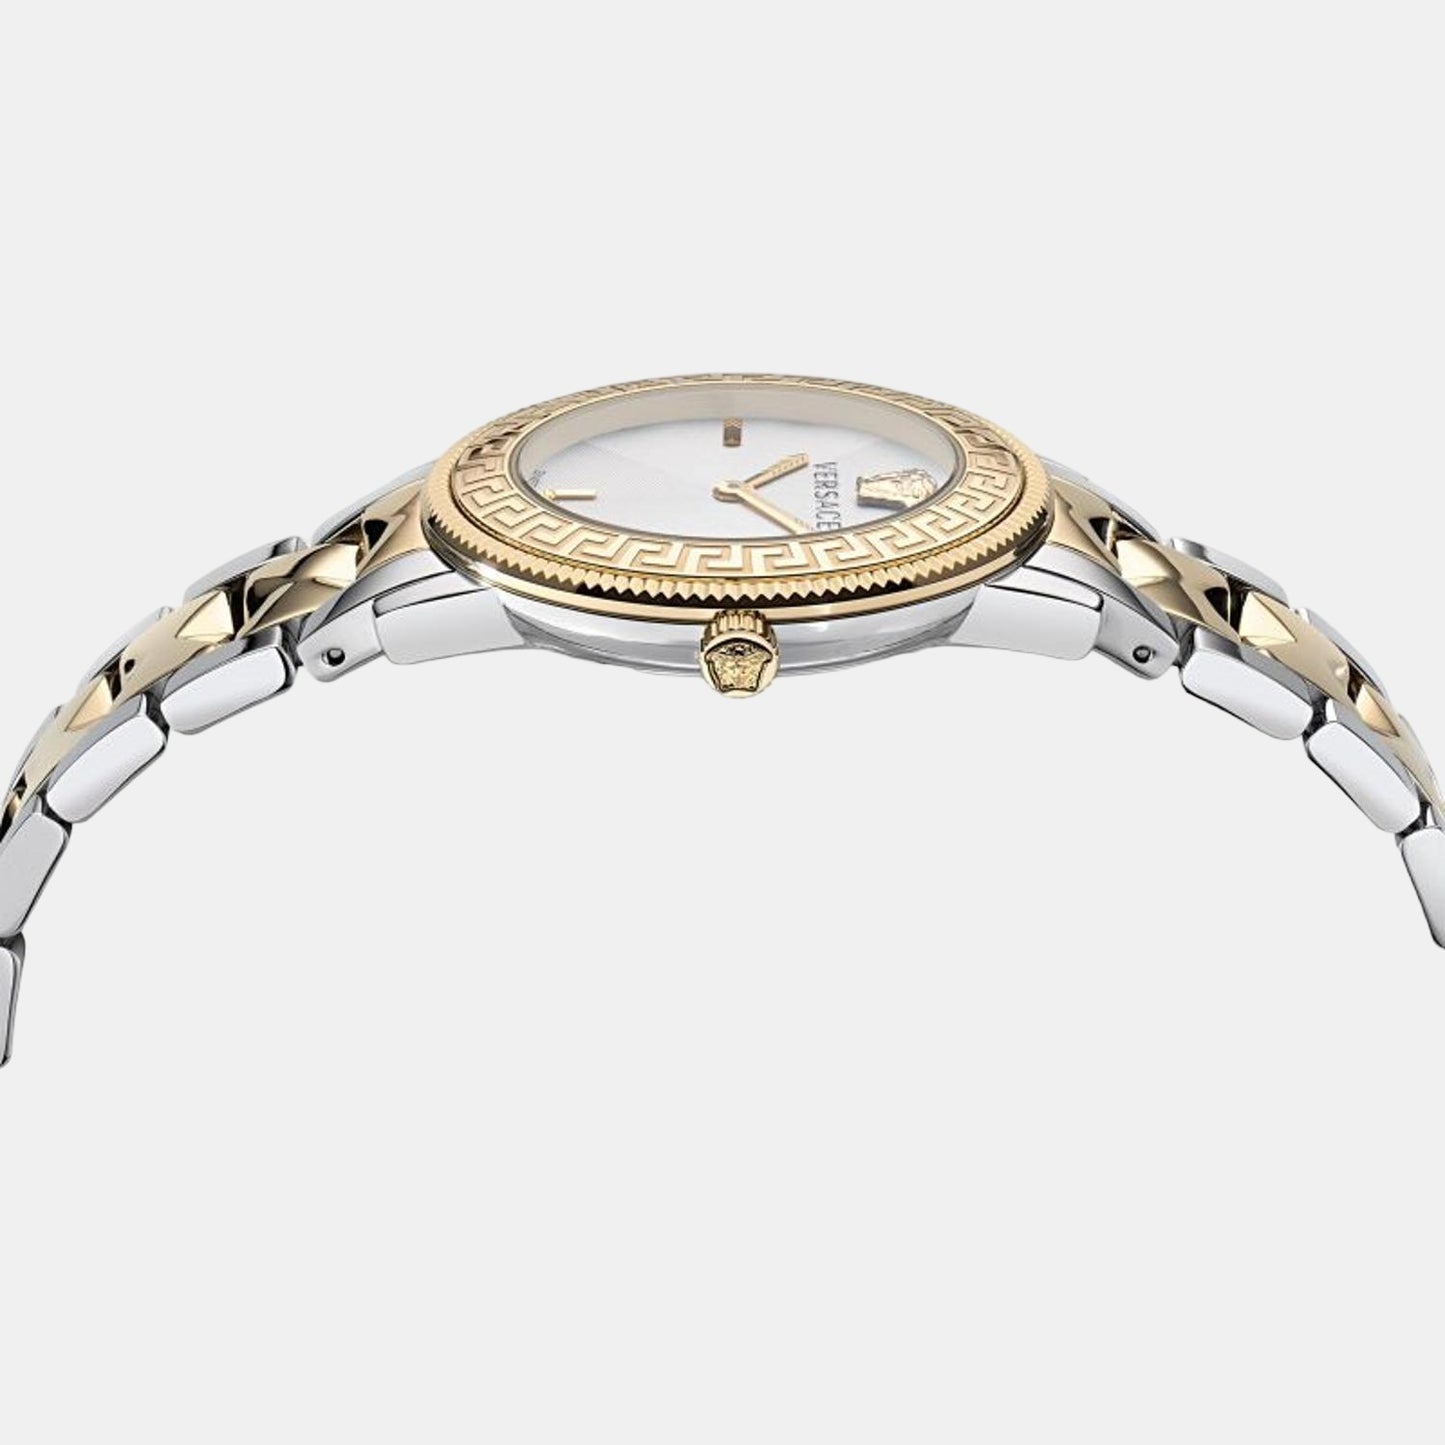 versace-stainless-steel-white-analog-female-watch-ve2p00422